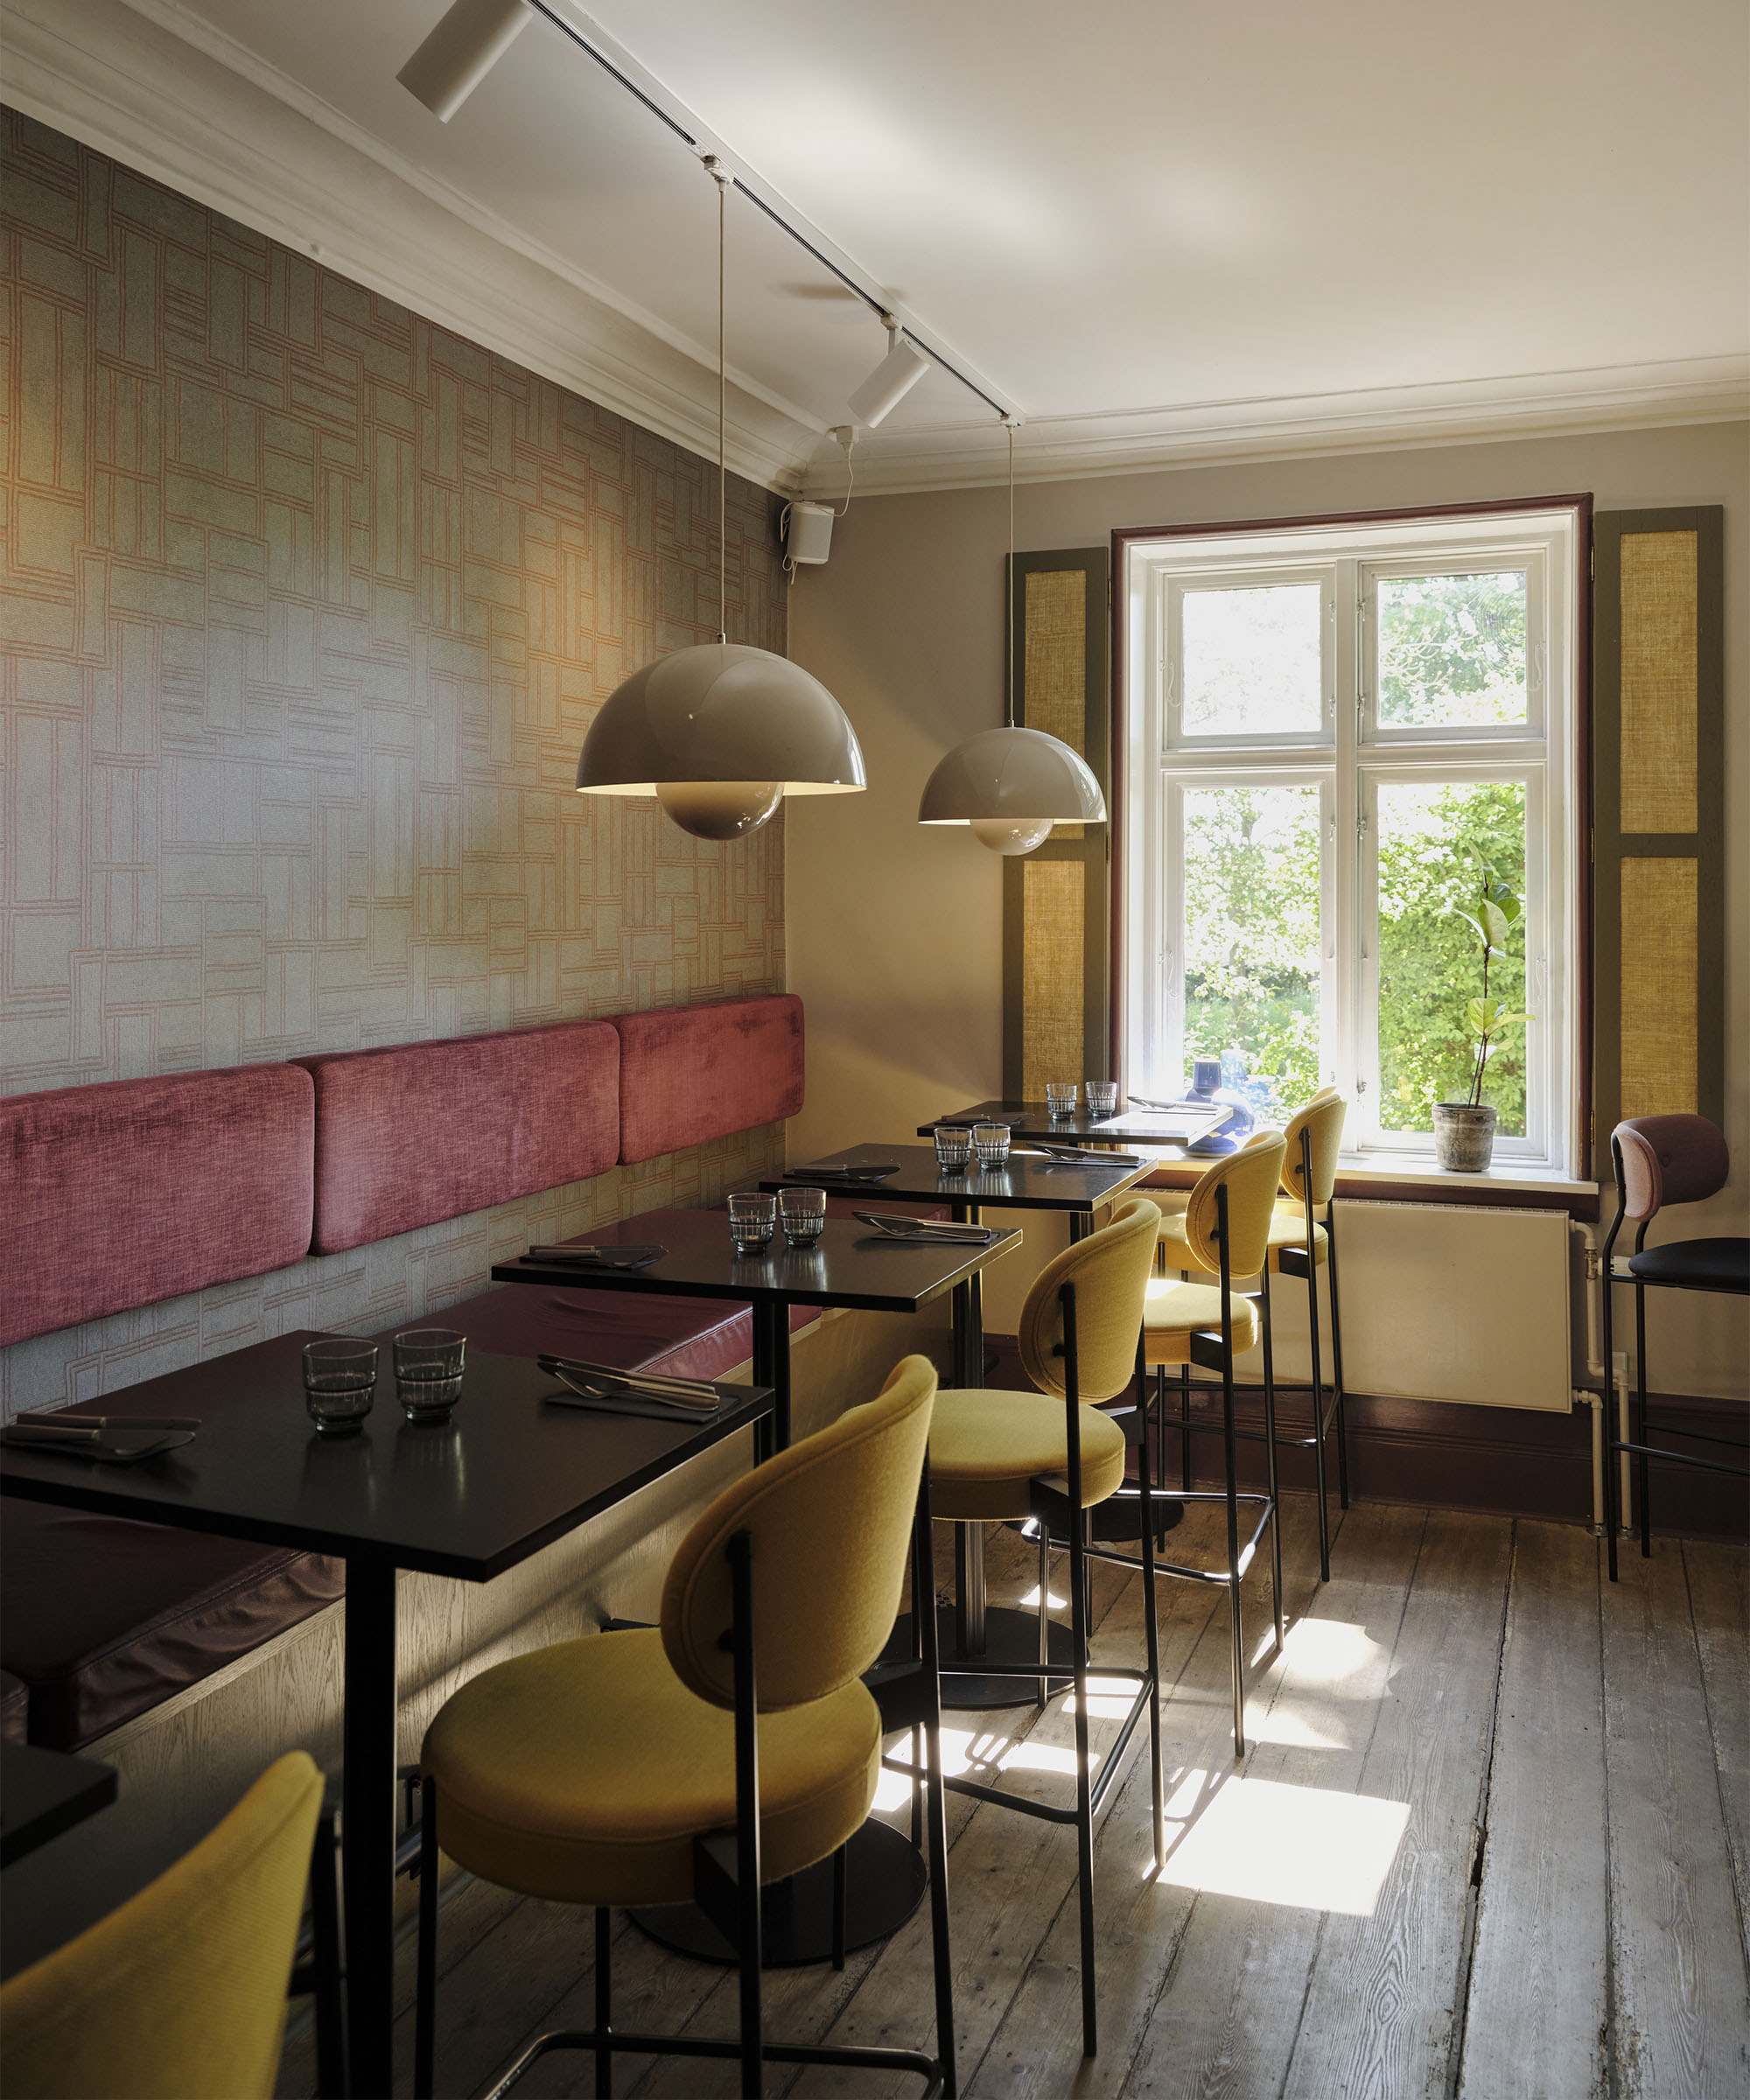 5-course menu at Lola – A Michelin-recommended restaurant in an idyllic corner of Christianshavn serving innovative dishes with influences from around the world